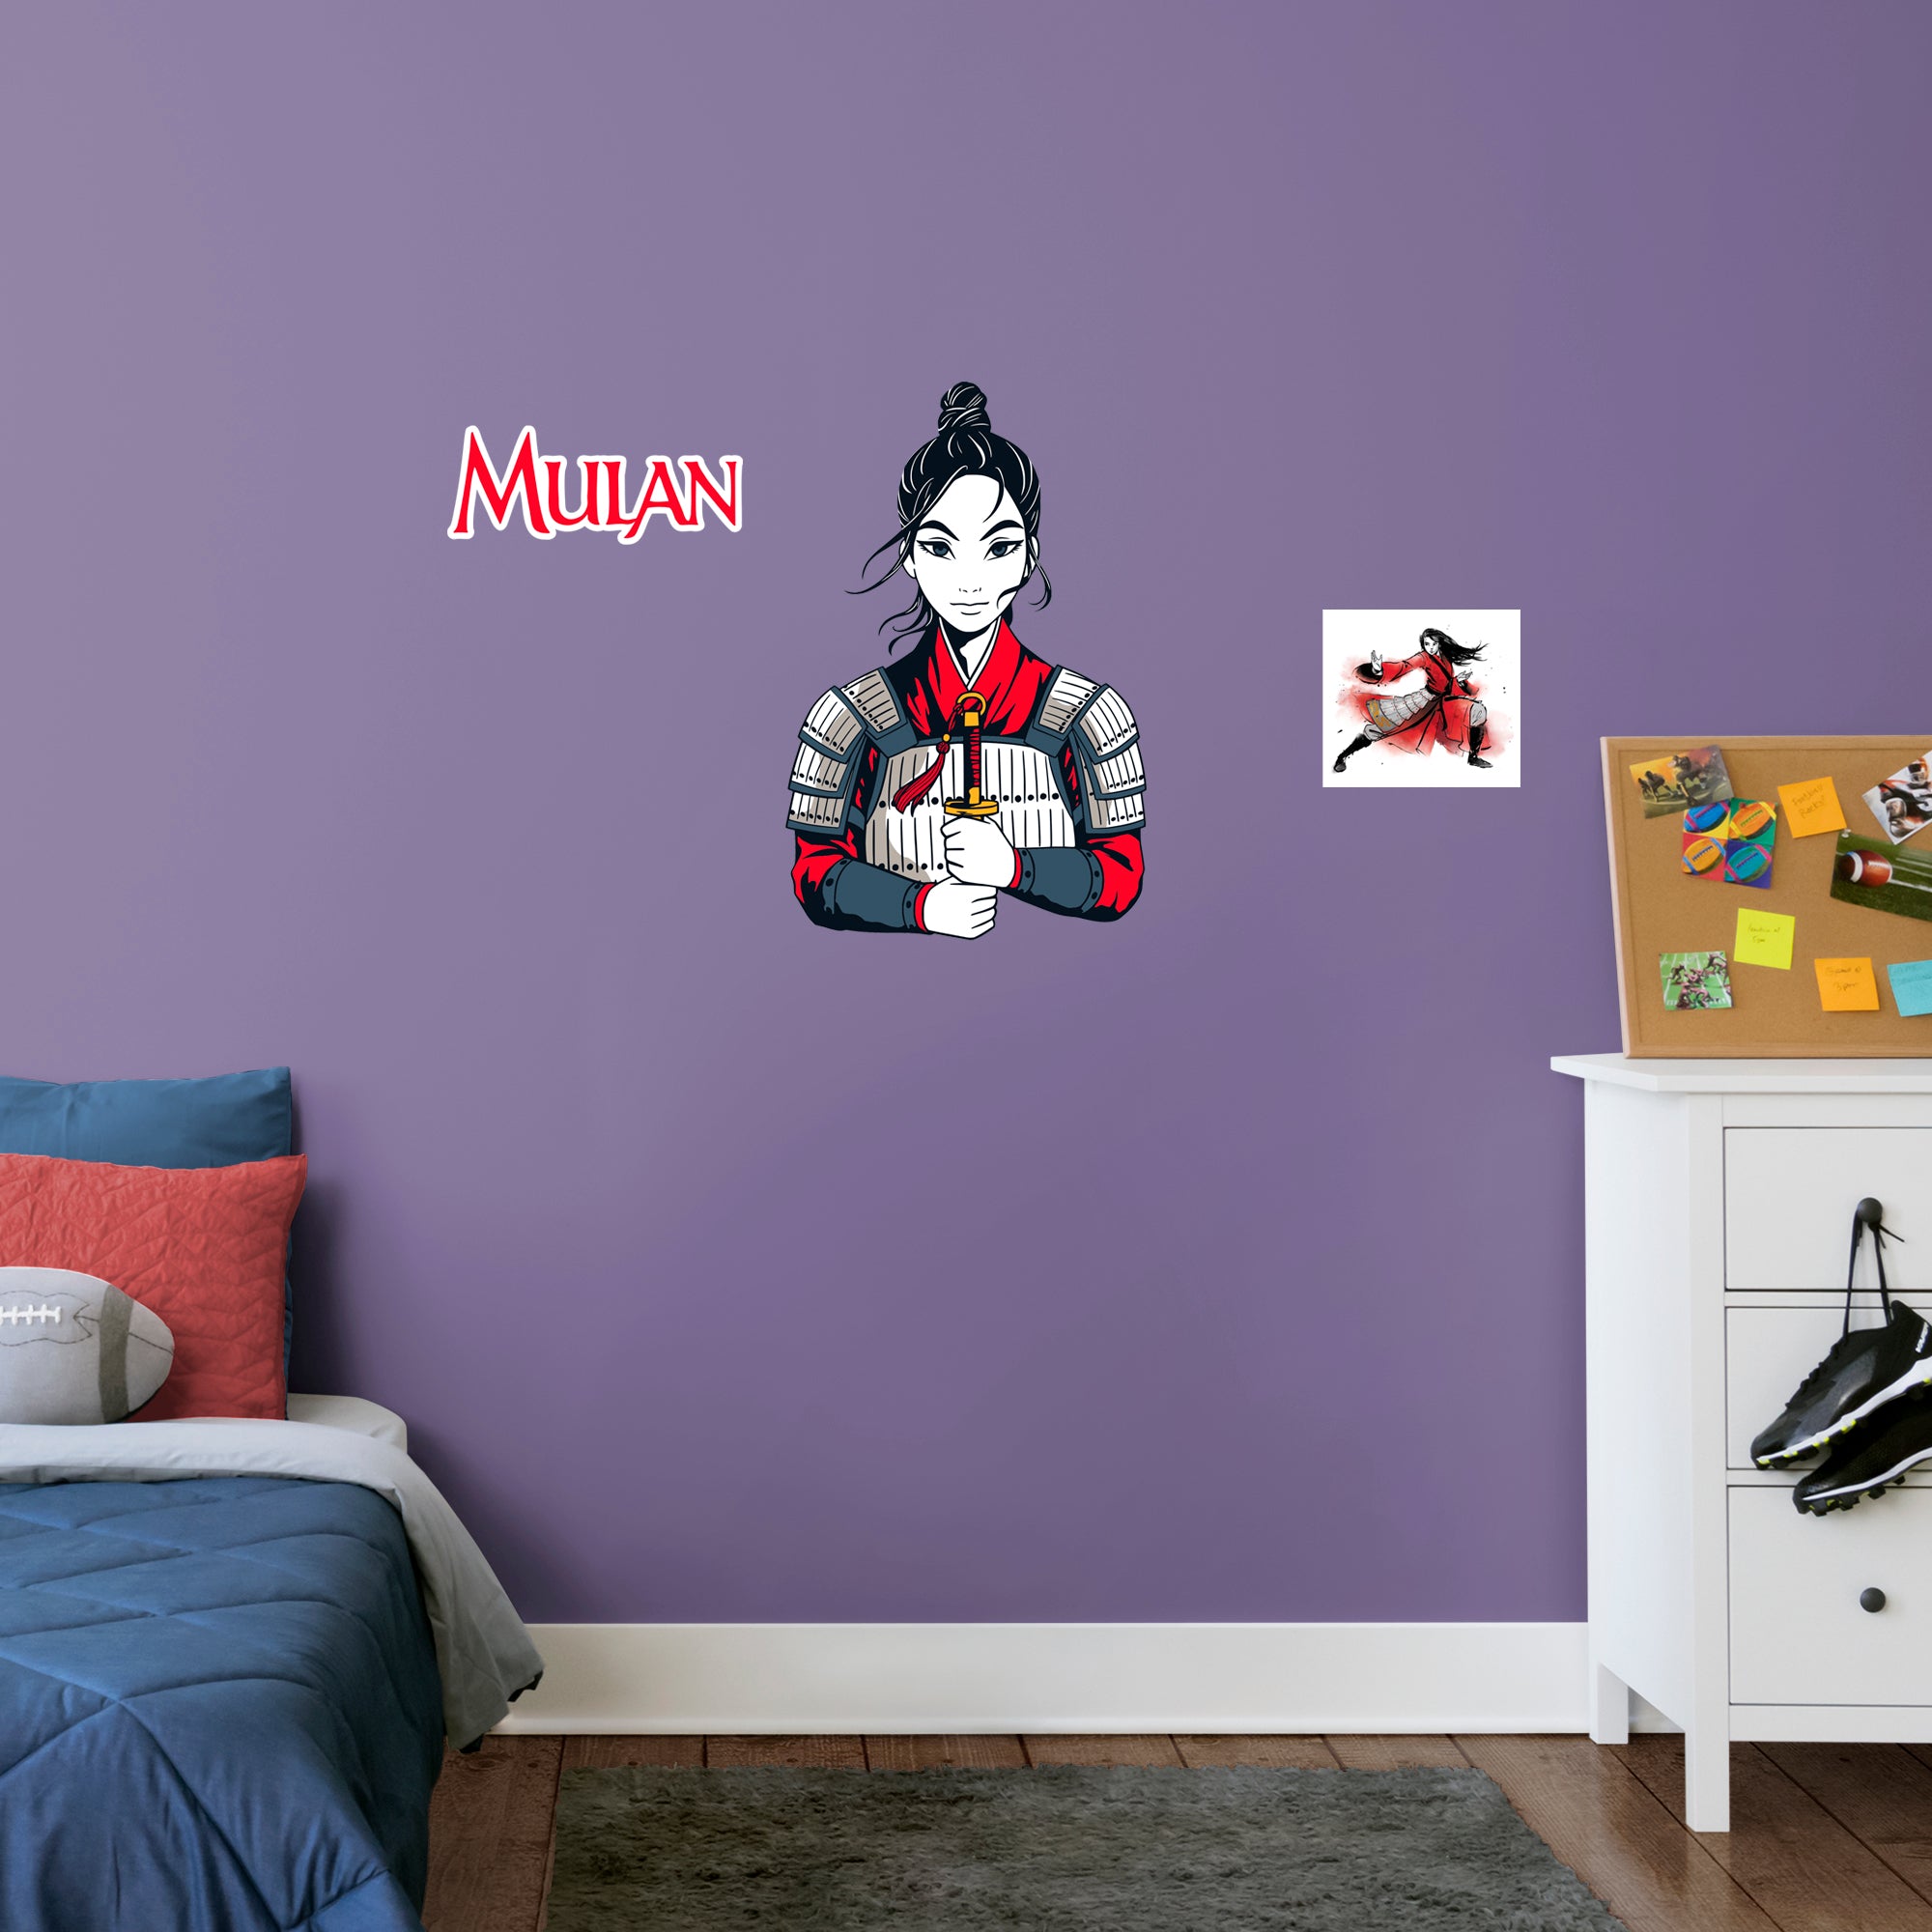 Mulan (Warrior) - Illustrated-Officially Licensed Disney Removable Wall Decal XL by Fathead | Vinyl